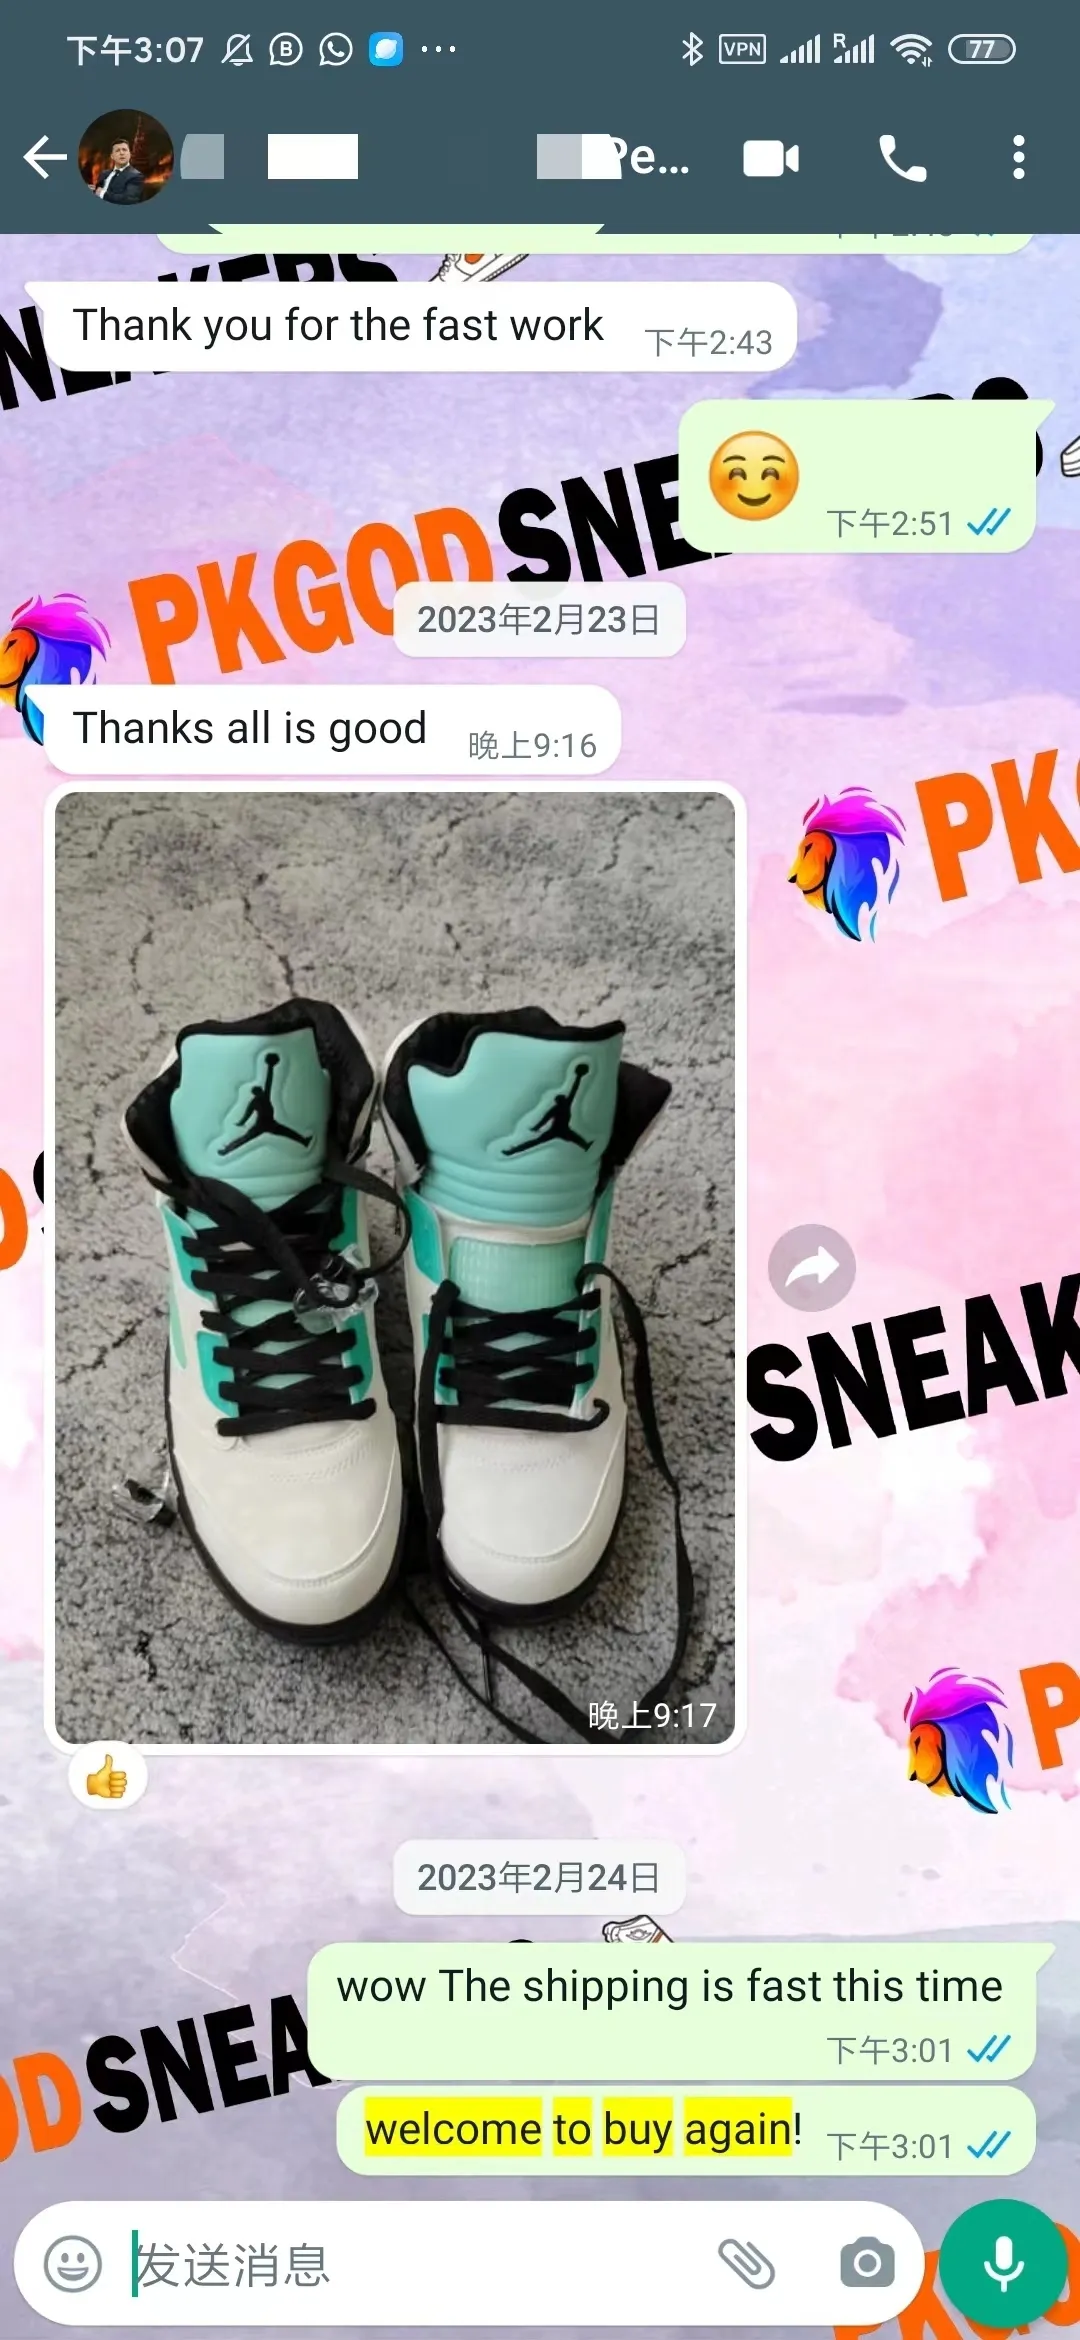 Official PKGoden Sneakers Customer Reviews of Other Pk Shoes